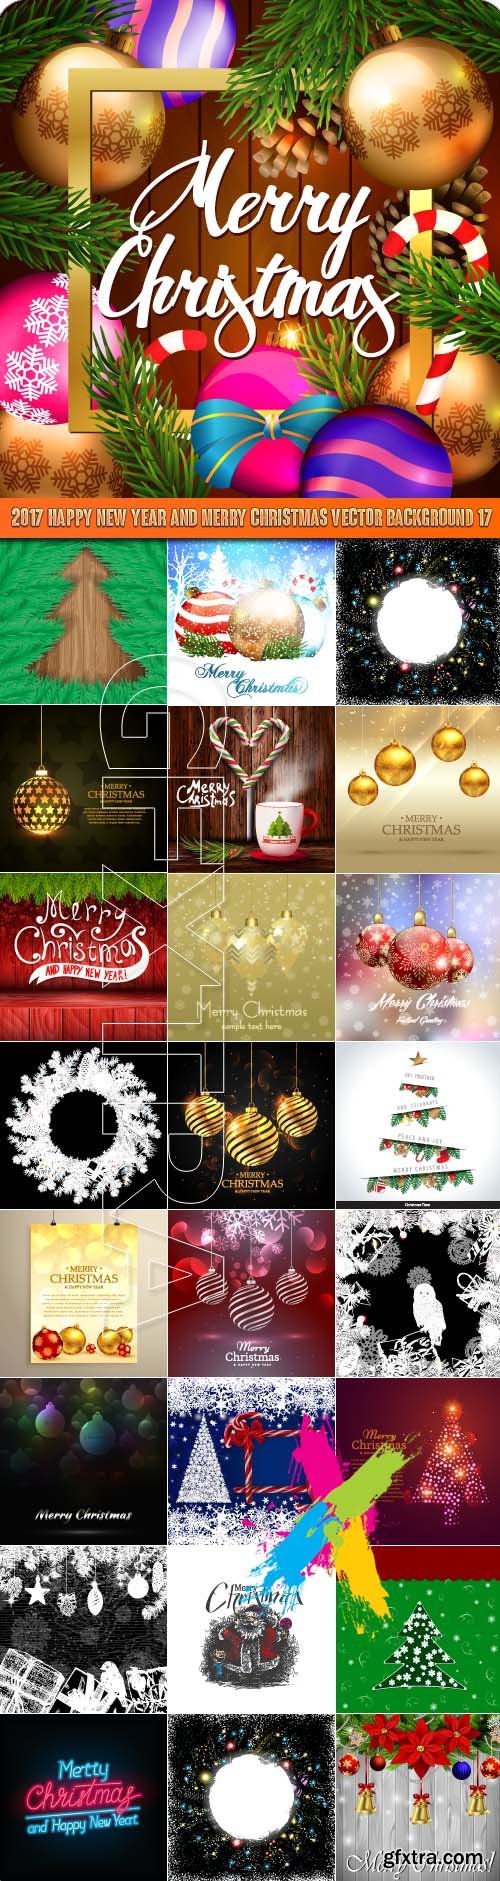 2017 Happy New Year and Merry Christmas vector background 17